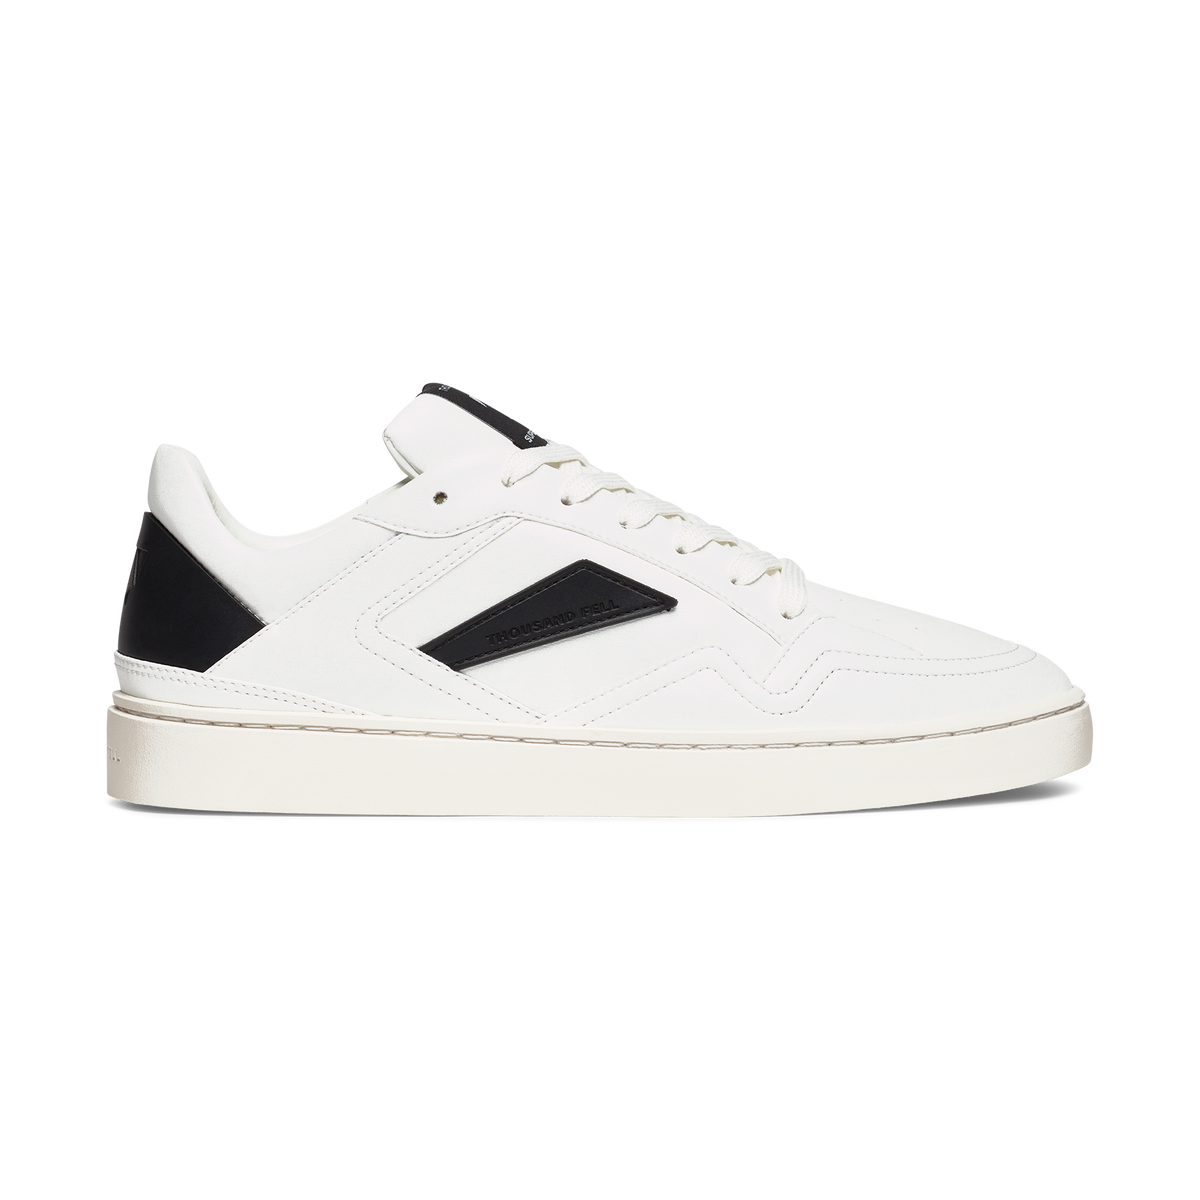 eco-friendly sneaker in white with black details